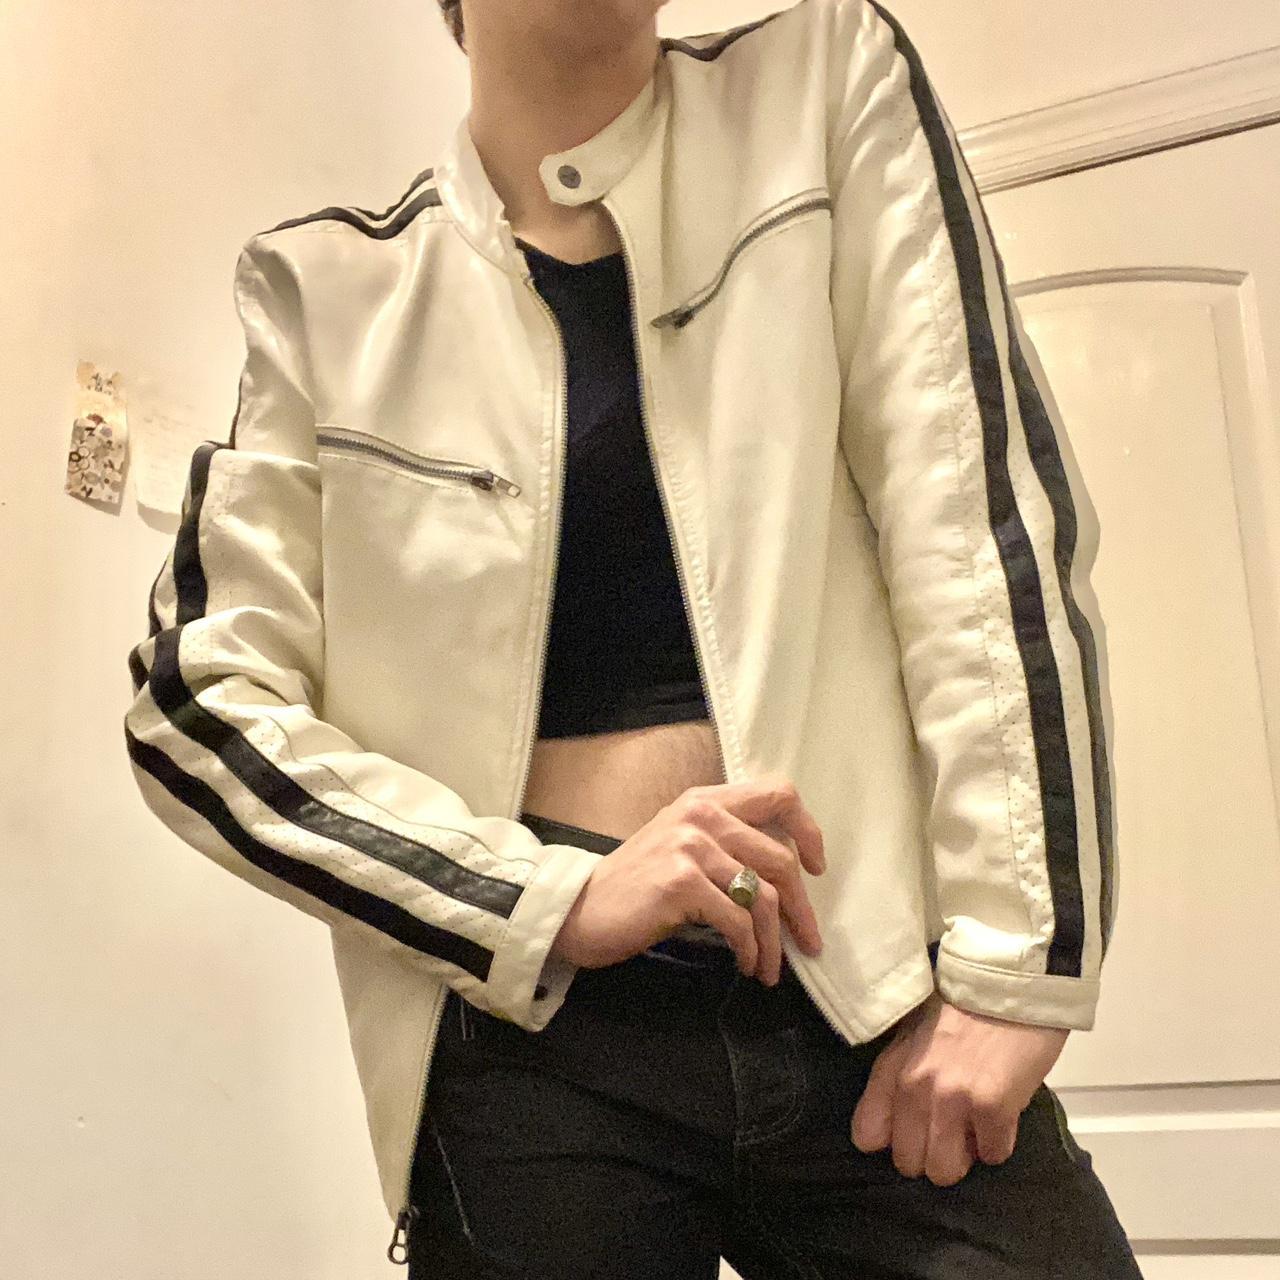 Wilson’s Leather Men's White and Black Jacket